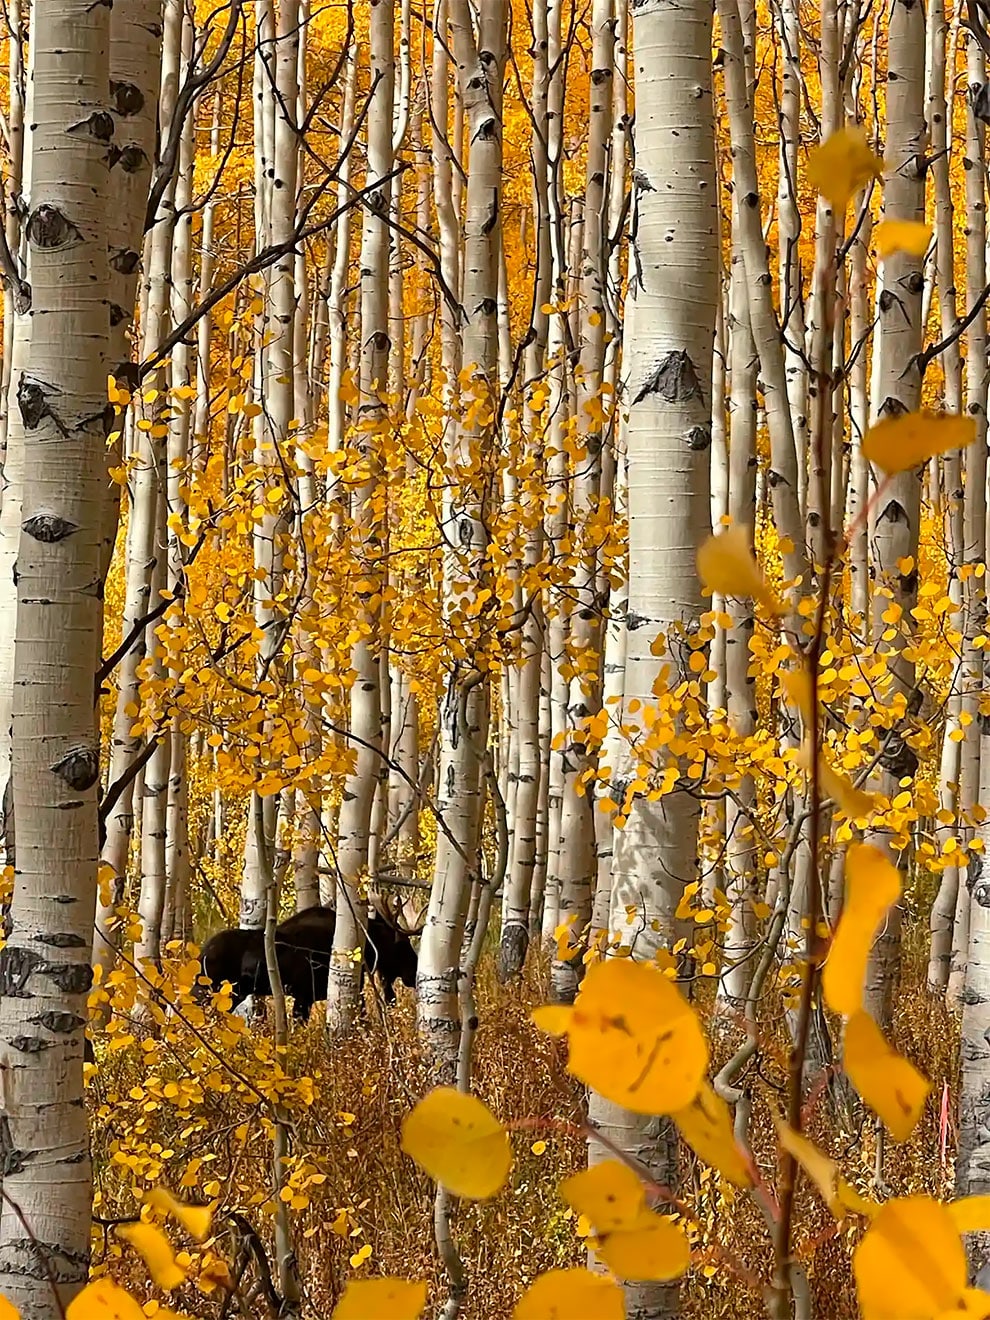 First place – nature. Moose in Aspen